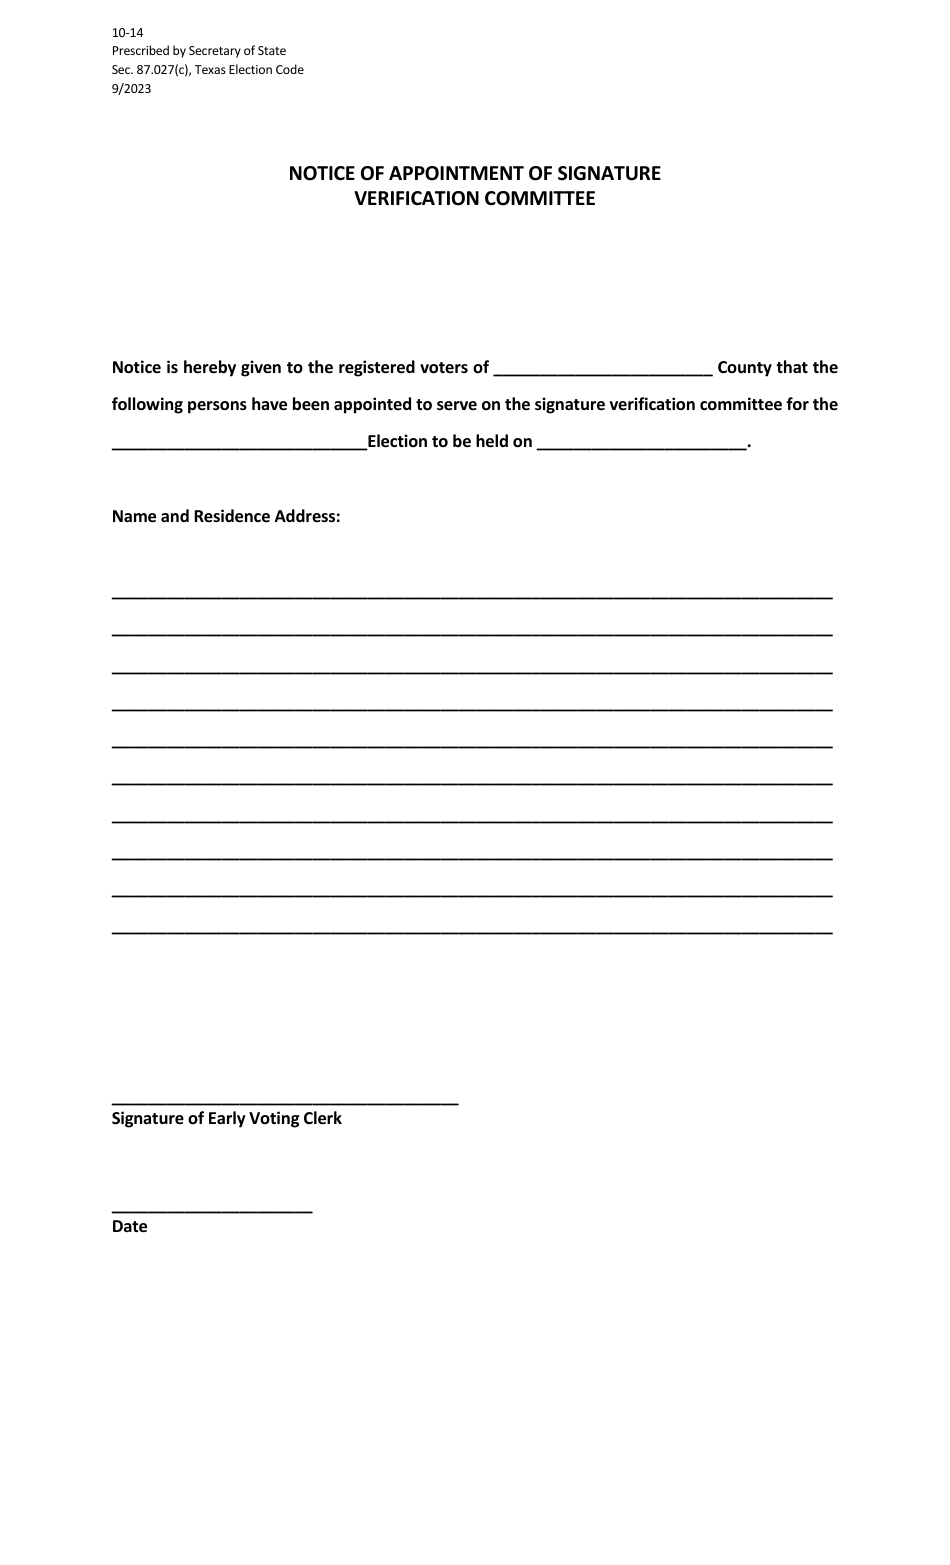 Form 10-14 Notice of Appointment of Signature Verification Committee - Texas (English / Spanish), Page 1